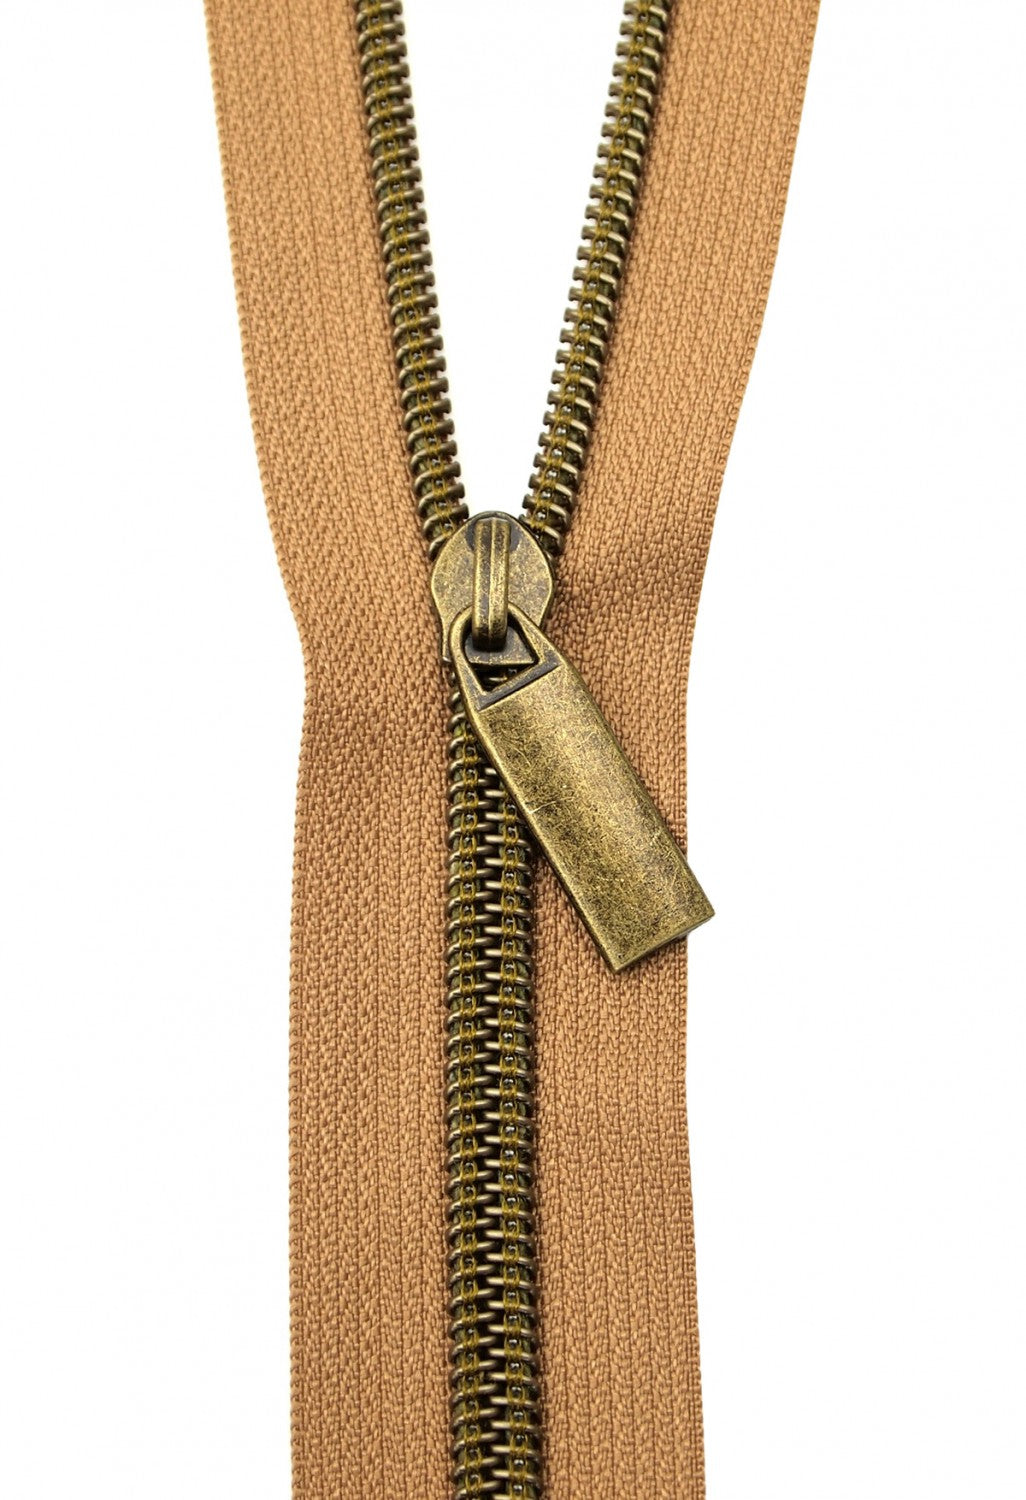 Natural #5 Nylon Antique Brass Coil Zippers: 3 Yards with 9 Pulls from Sallie Tomato